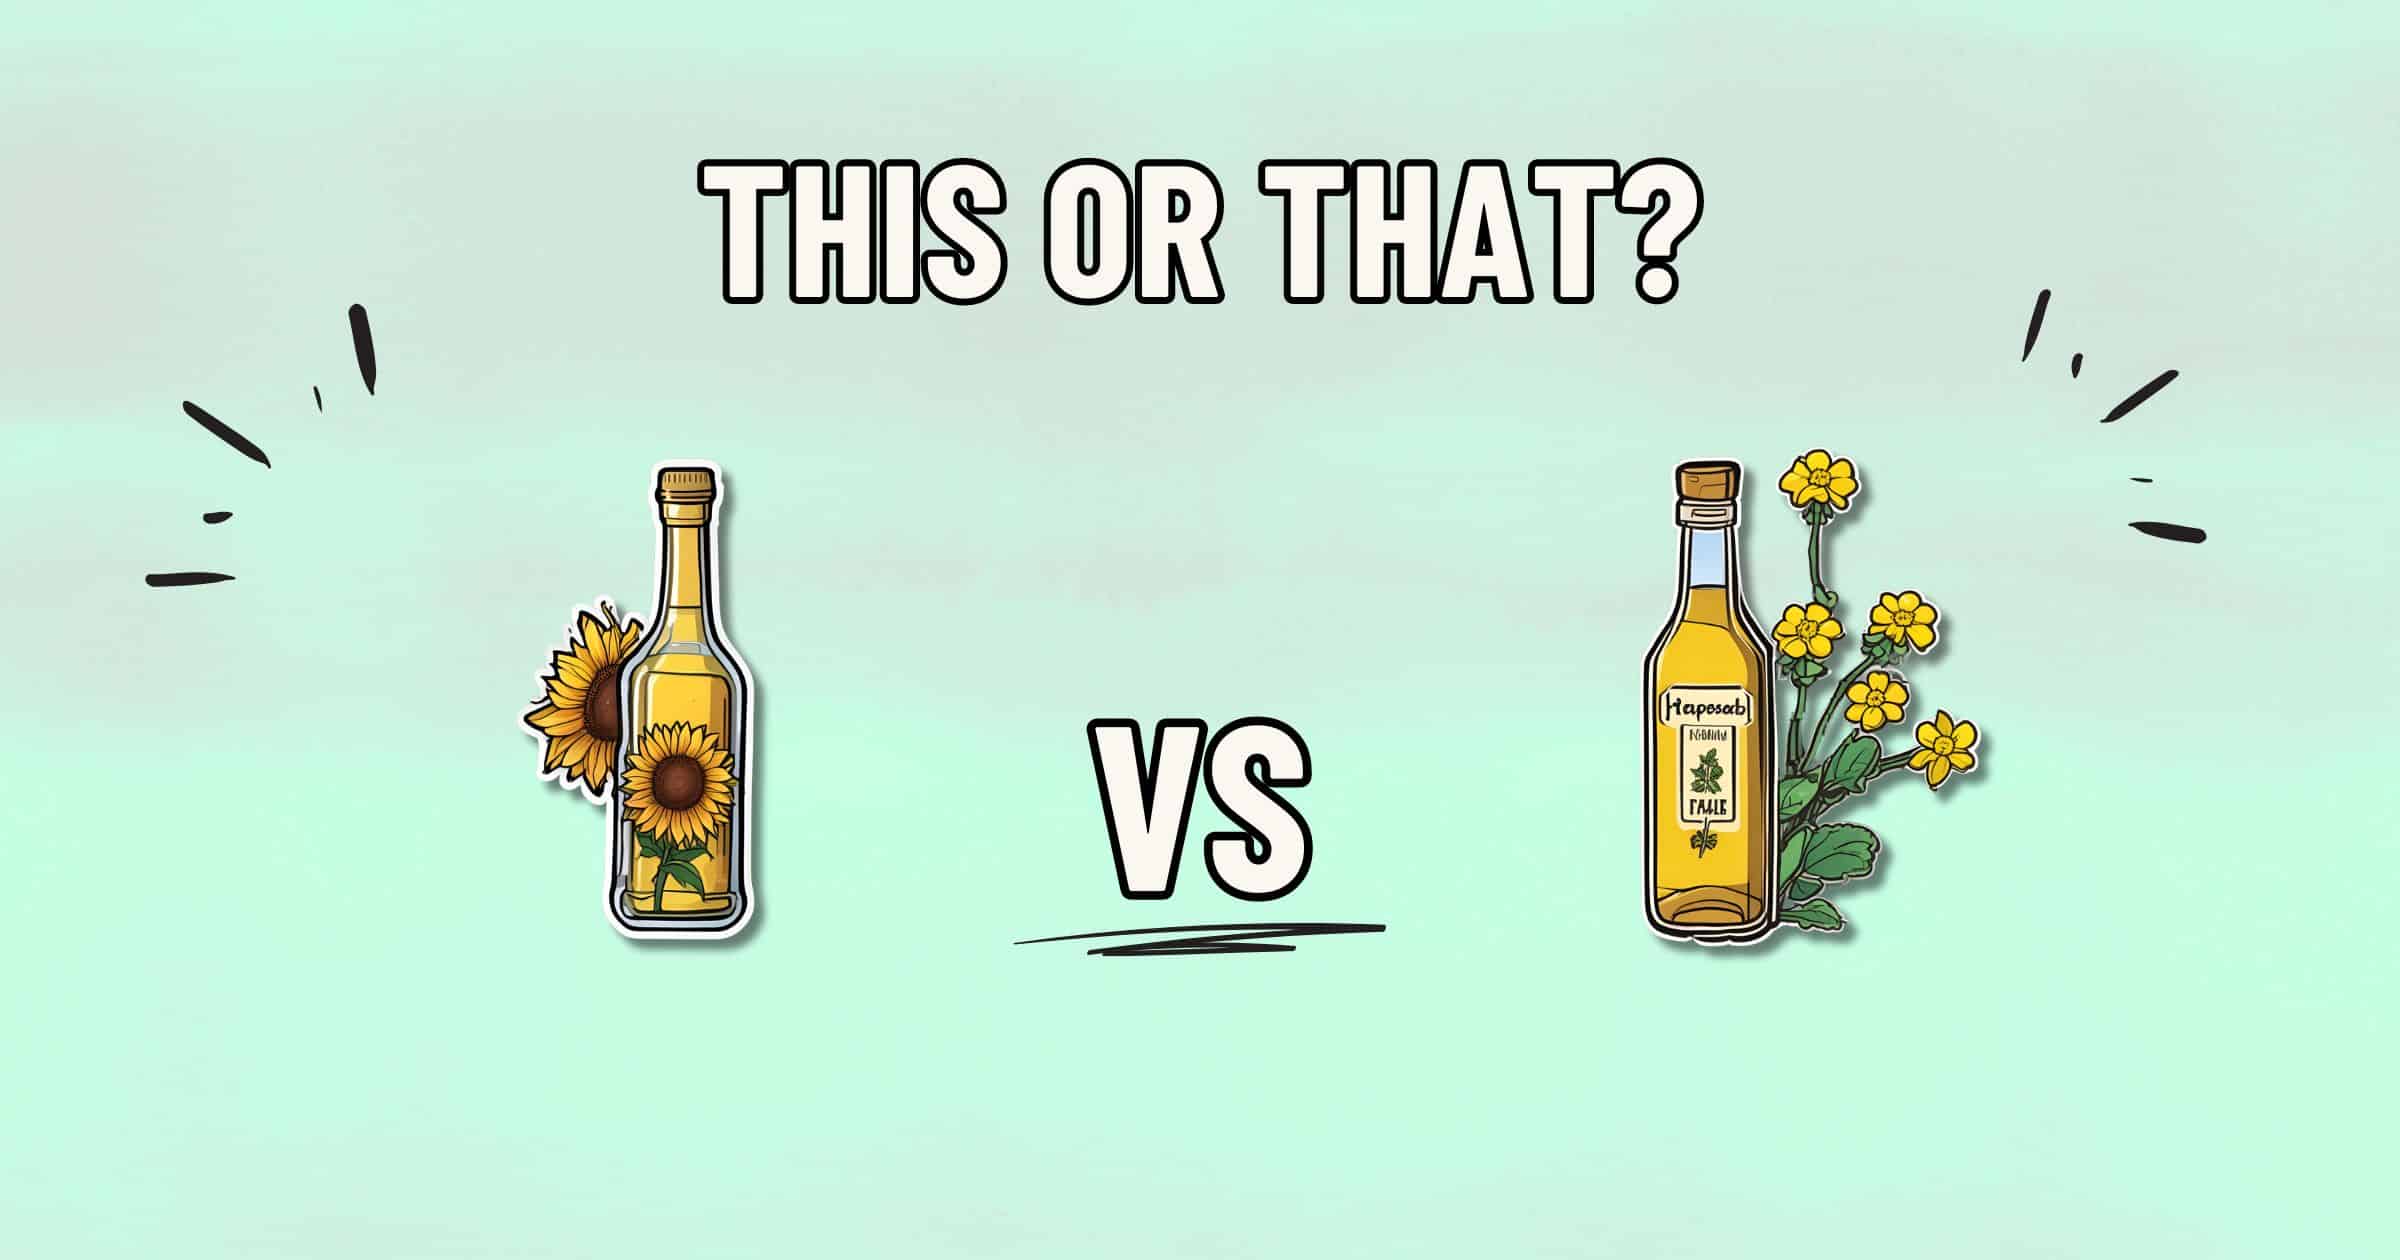 A graphic with text "THIS OR THAT?" at the top and "VS" in the middle. On the left is a bottle of sunflower oil with sunflower decorations, and on the right is a bottle of canola oil with rapeseed plant decorations, both against a light green background. Which is healthier?